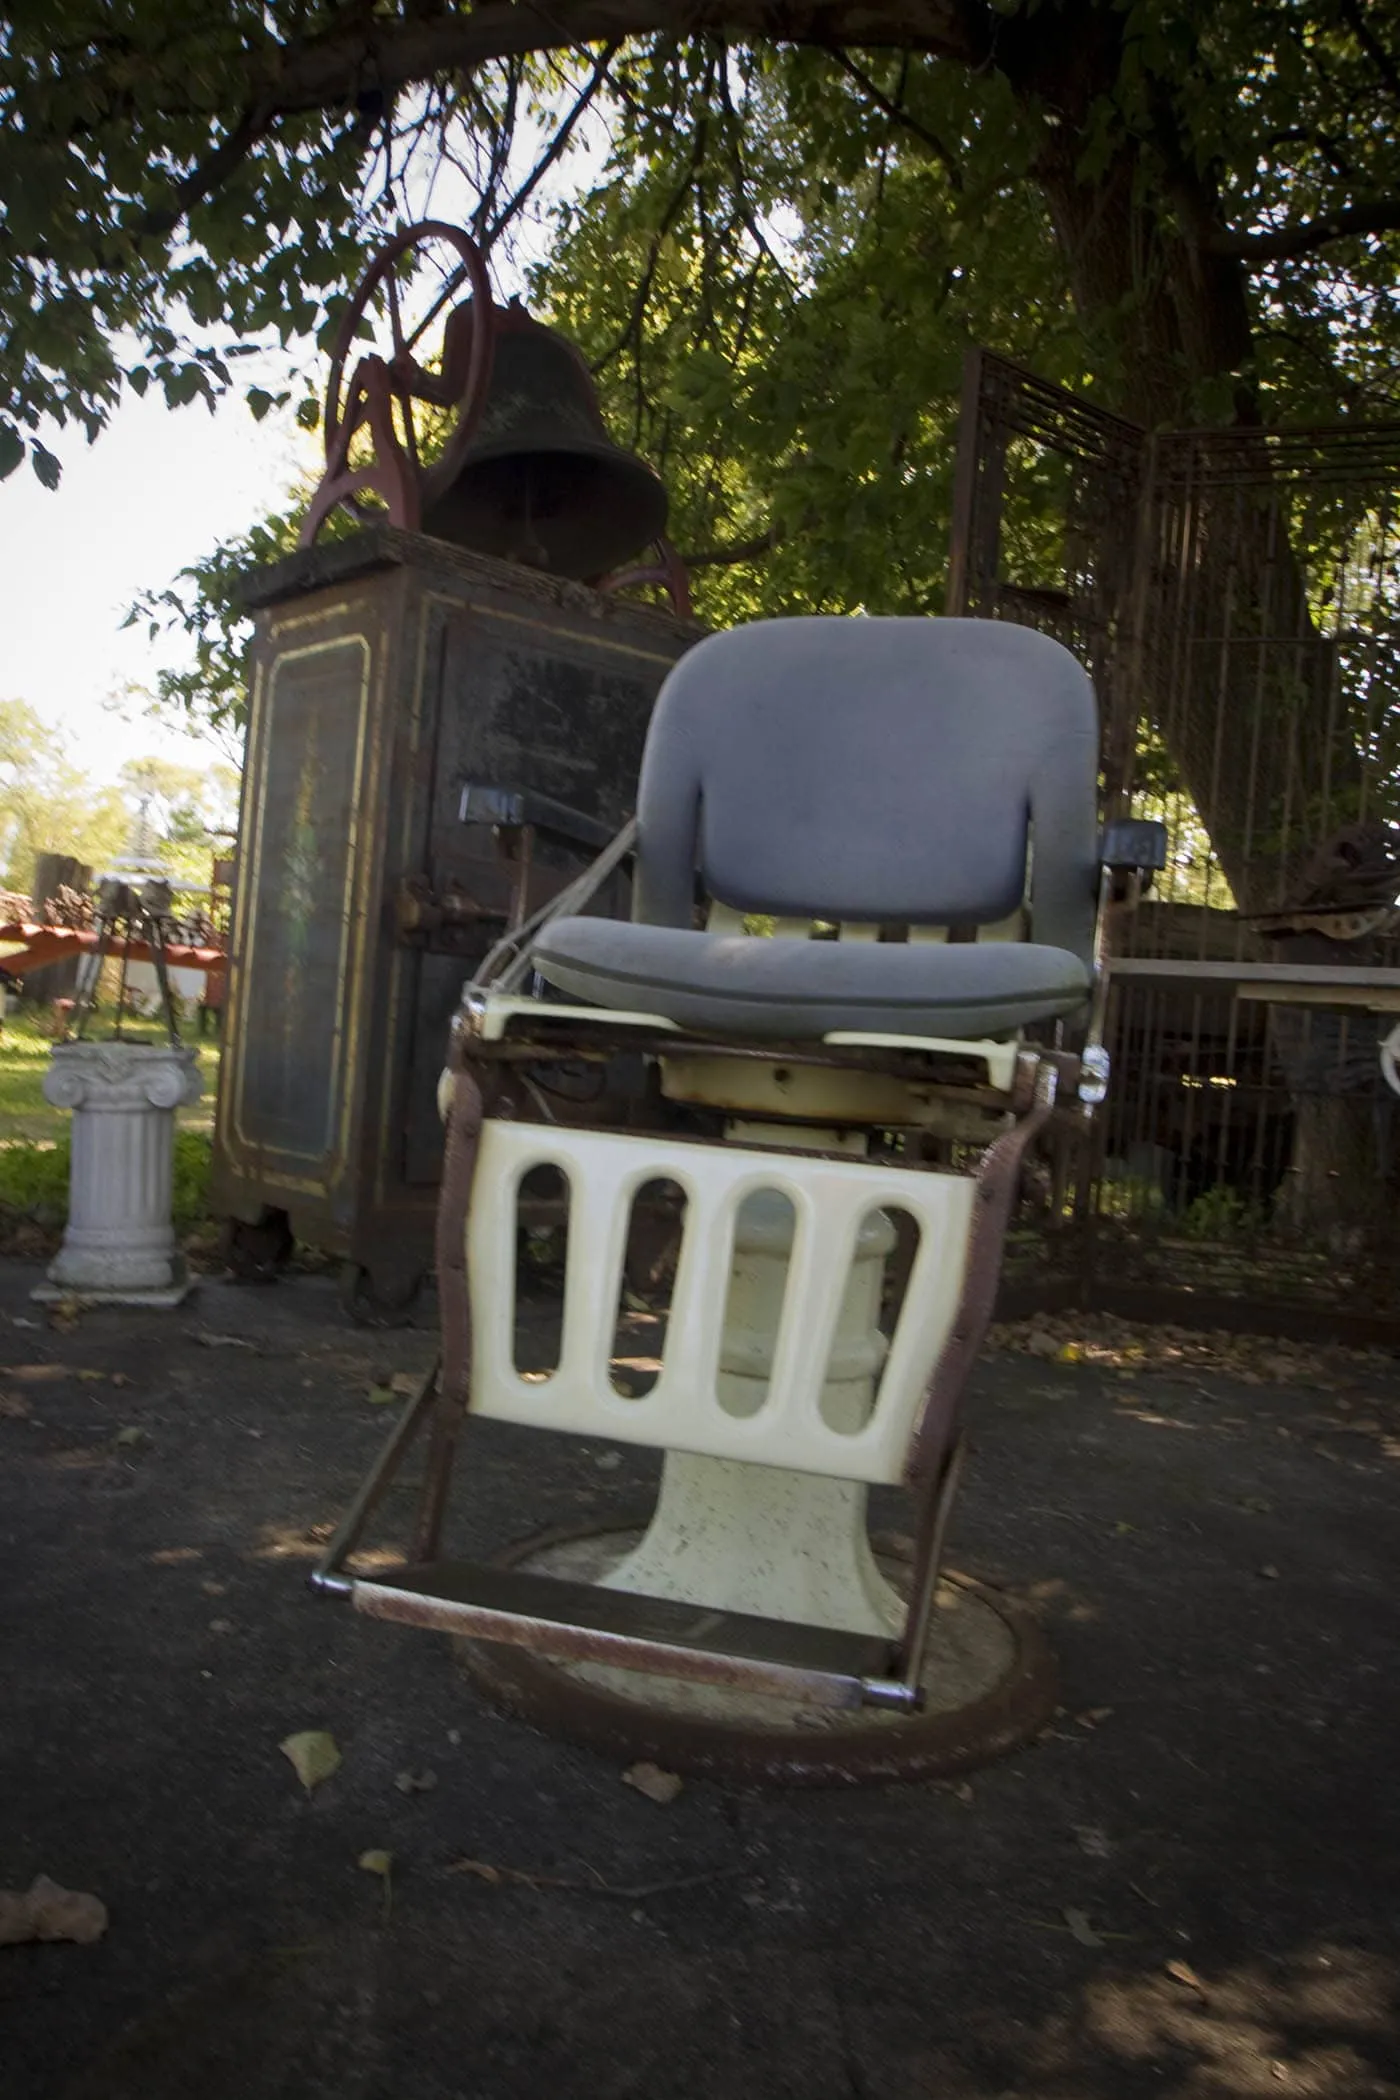 Old dentist chairs. The world's largest scrap metal sculpture, Dr. Evermor's Forevertron at Delaney's Surplus Sales in Sumpter, Wisconsin, is meant for intergalactic travel. Visit this weird roadside attraction on a Wisconsin road trip.